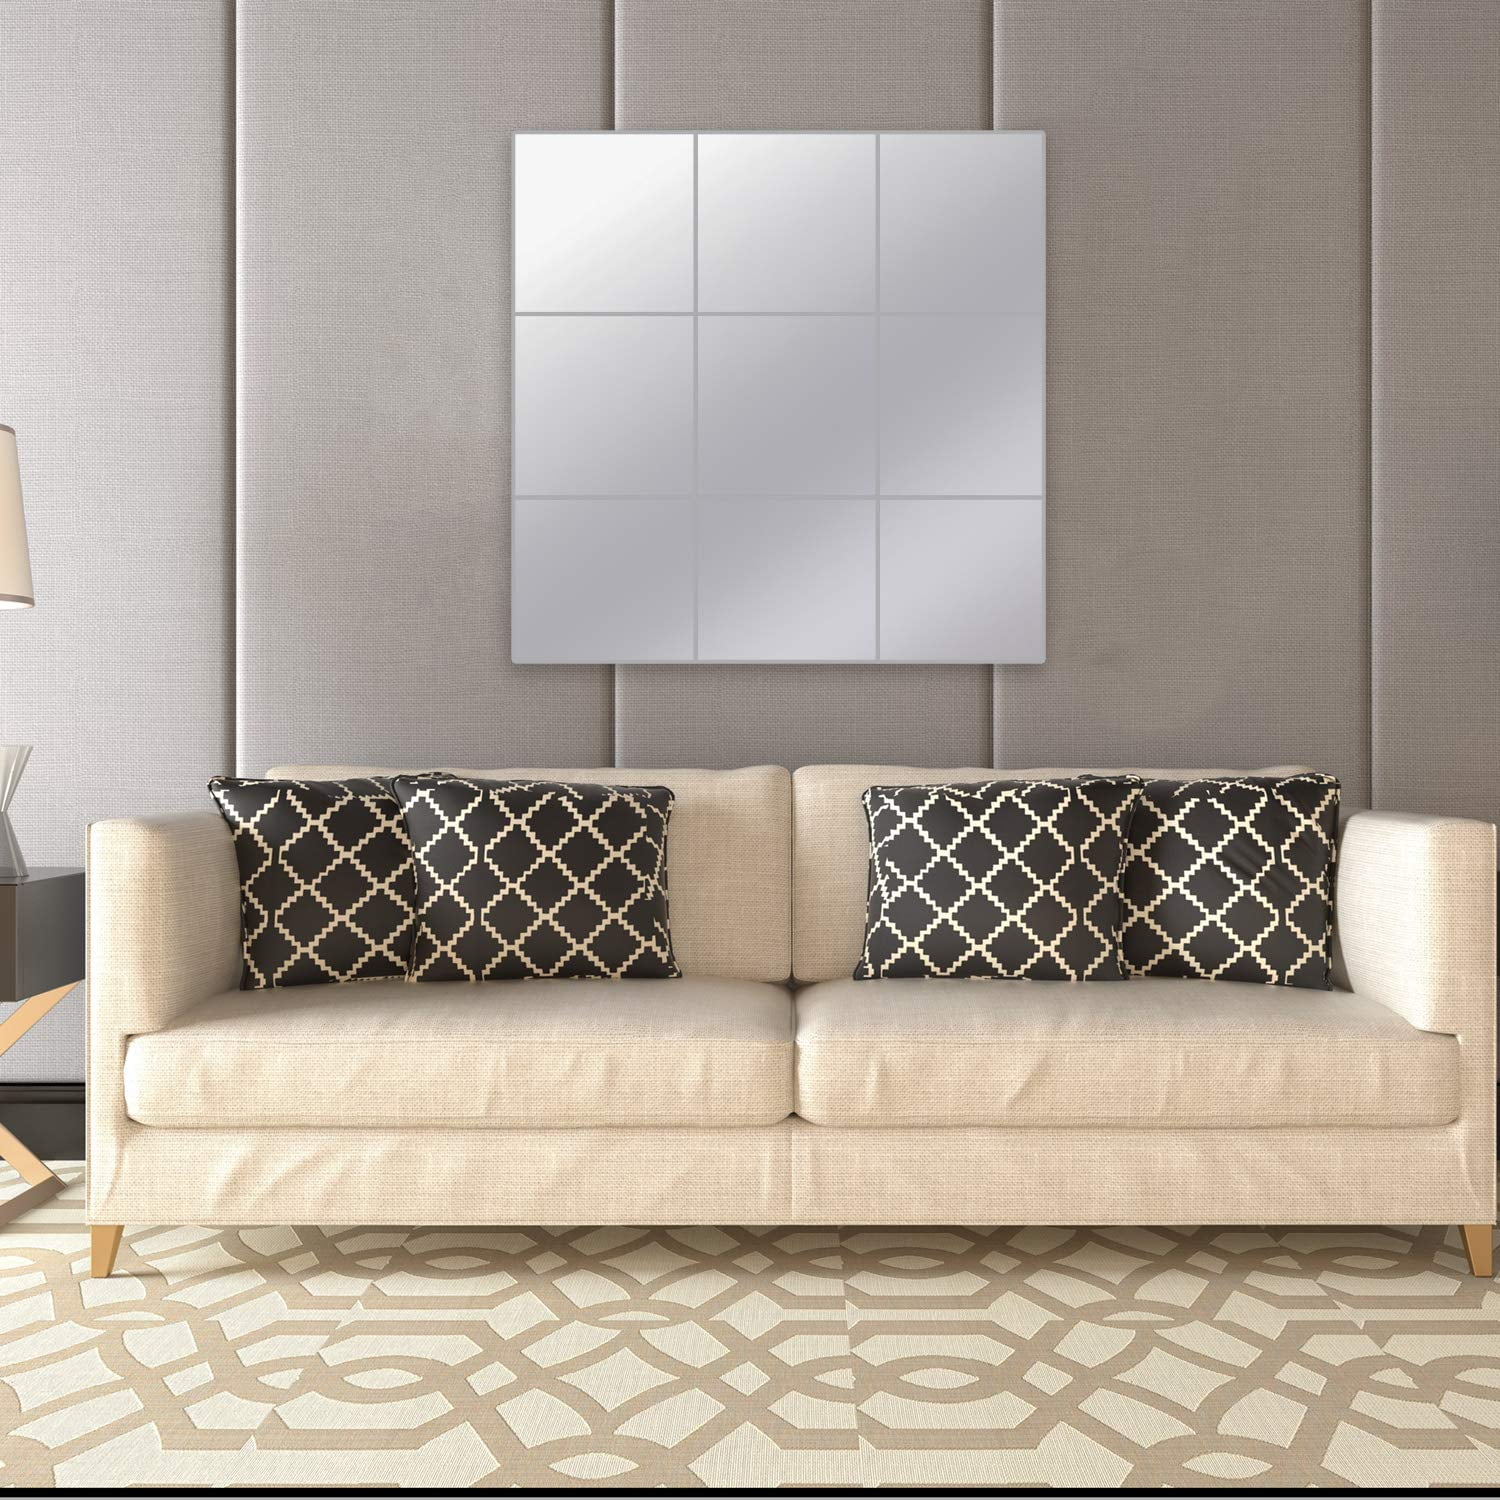 Details about  / 3D Mirror Wall Stickers Square Living Room Bedroom Entrance Decoration Bathroom